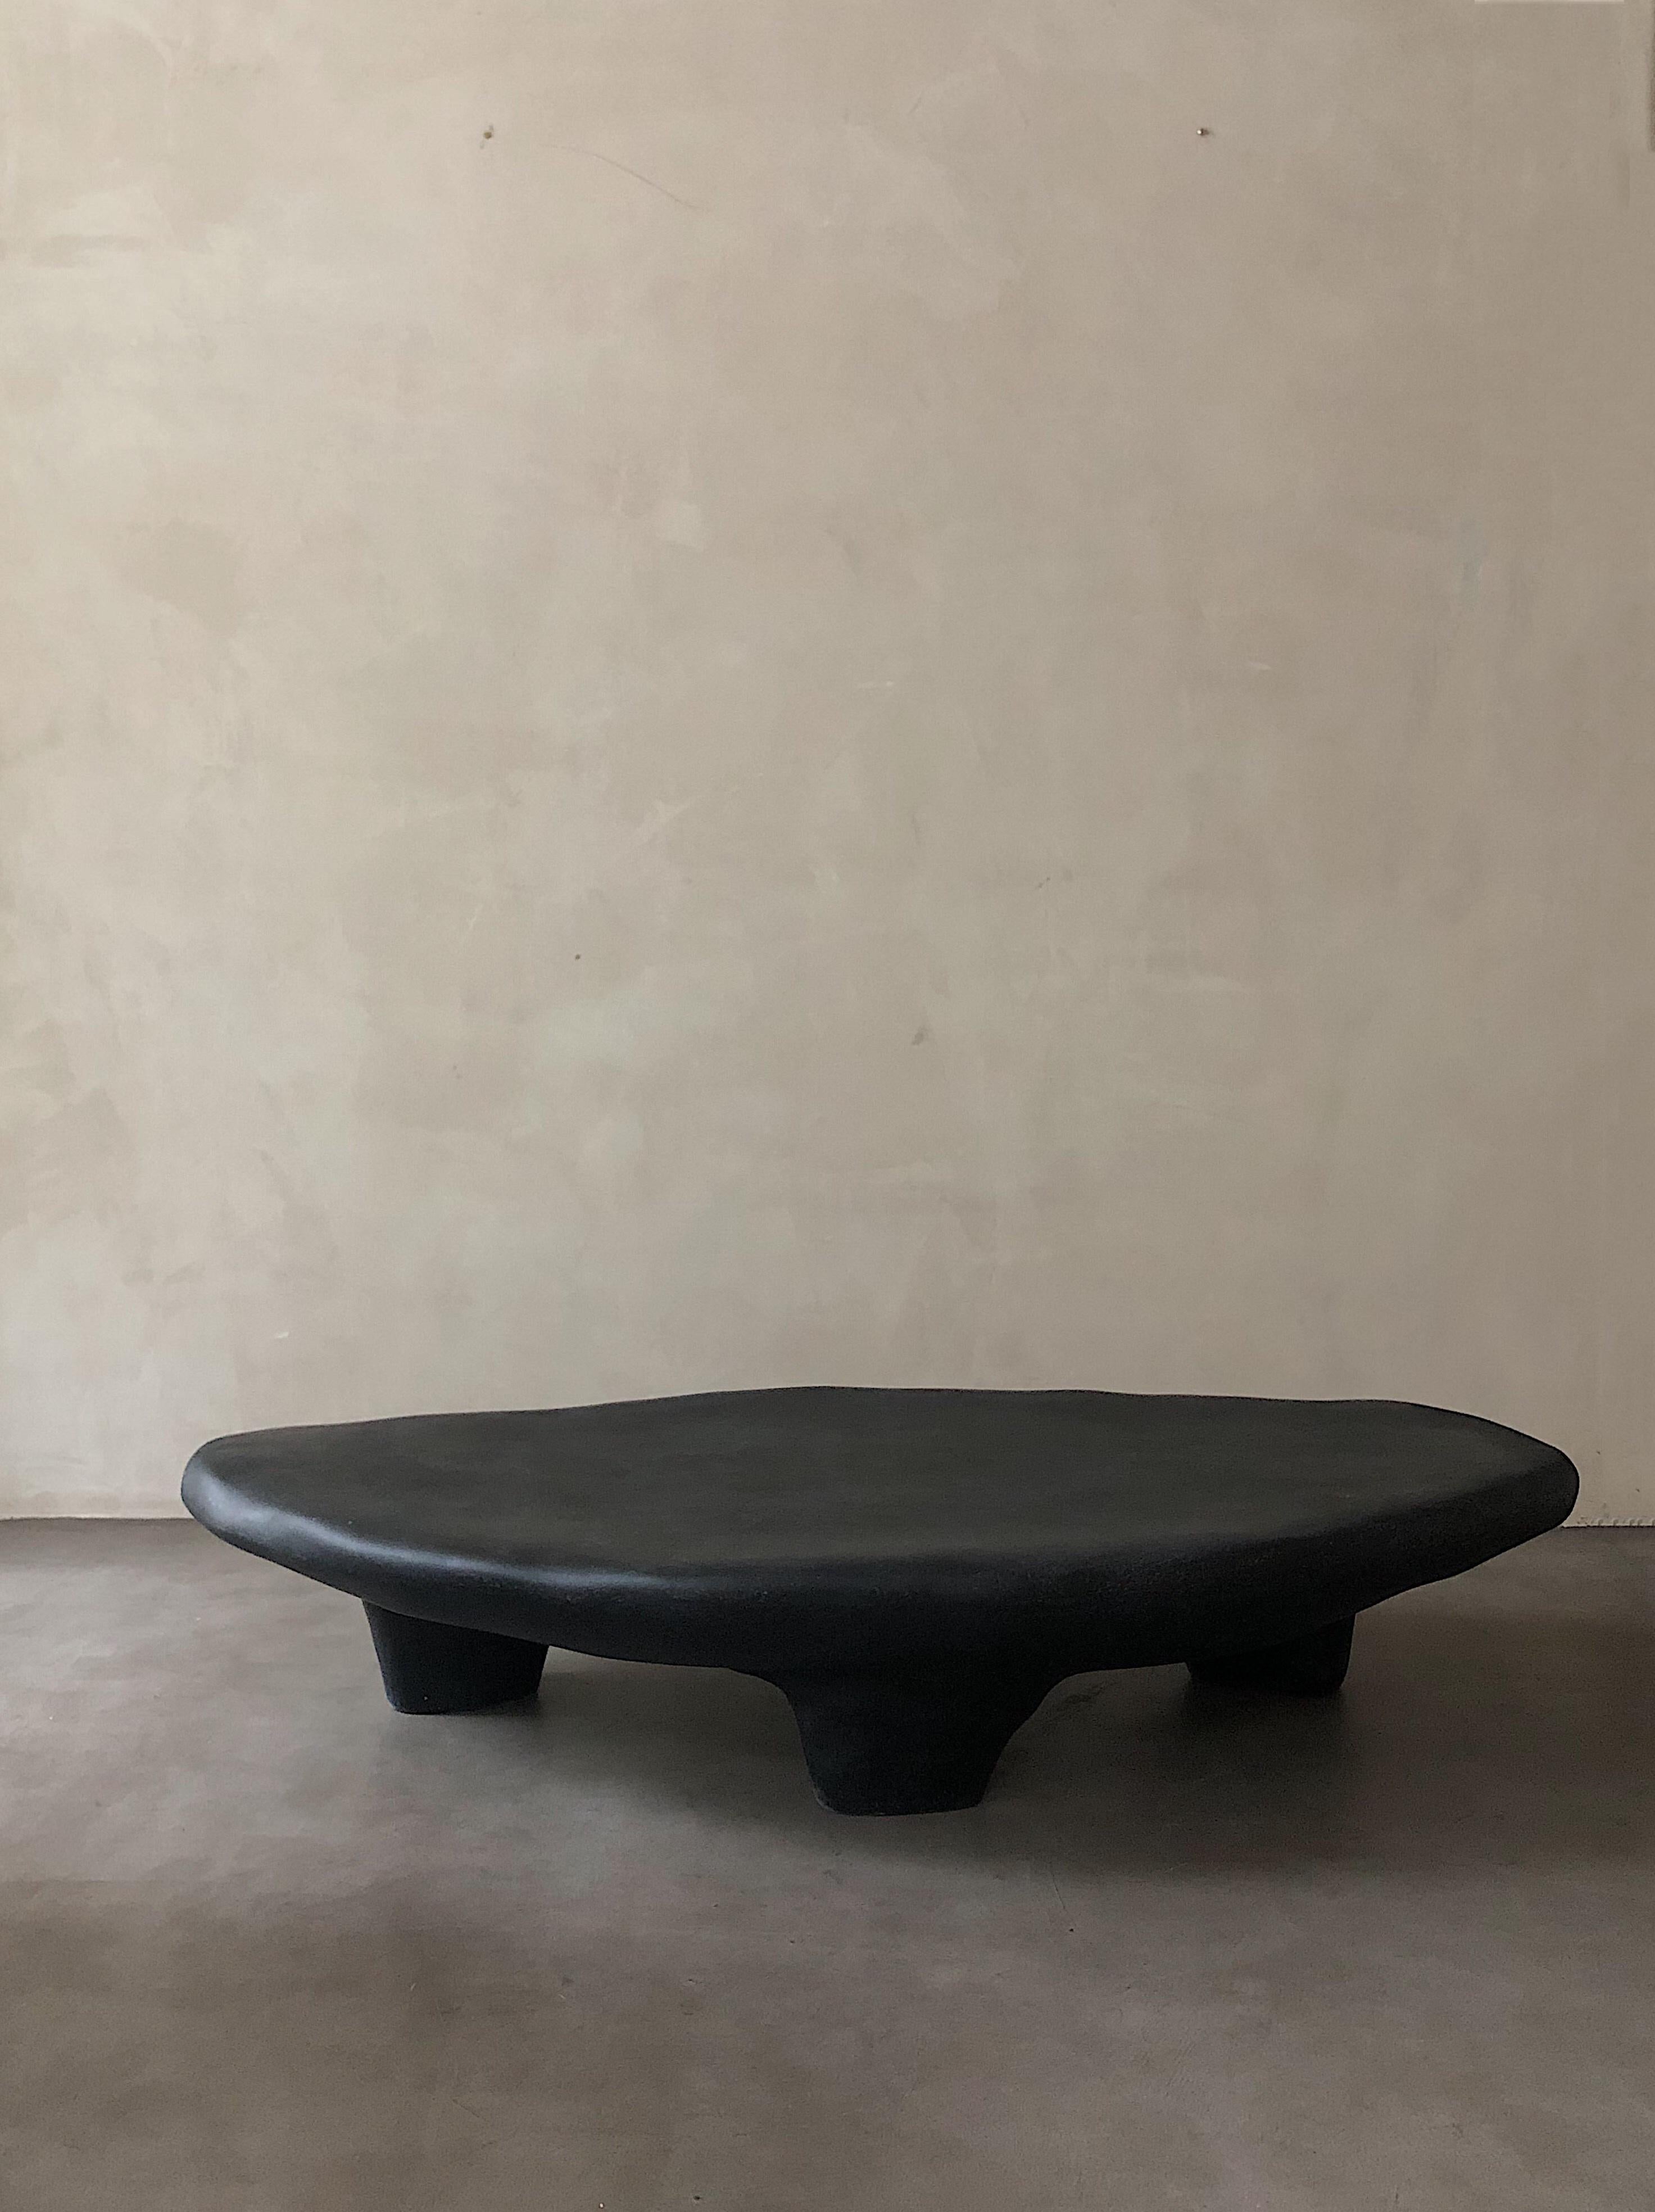 Black tripod coffee table by Karstudio
Materials: FRP
Dimensions: 150 x 85 x 30 cm

This piece is suitable for outdoor use.


Inspired by three-leg utensils which were the first creation of human being in ancient times. Triangle structure and